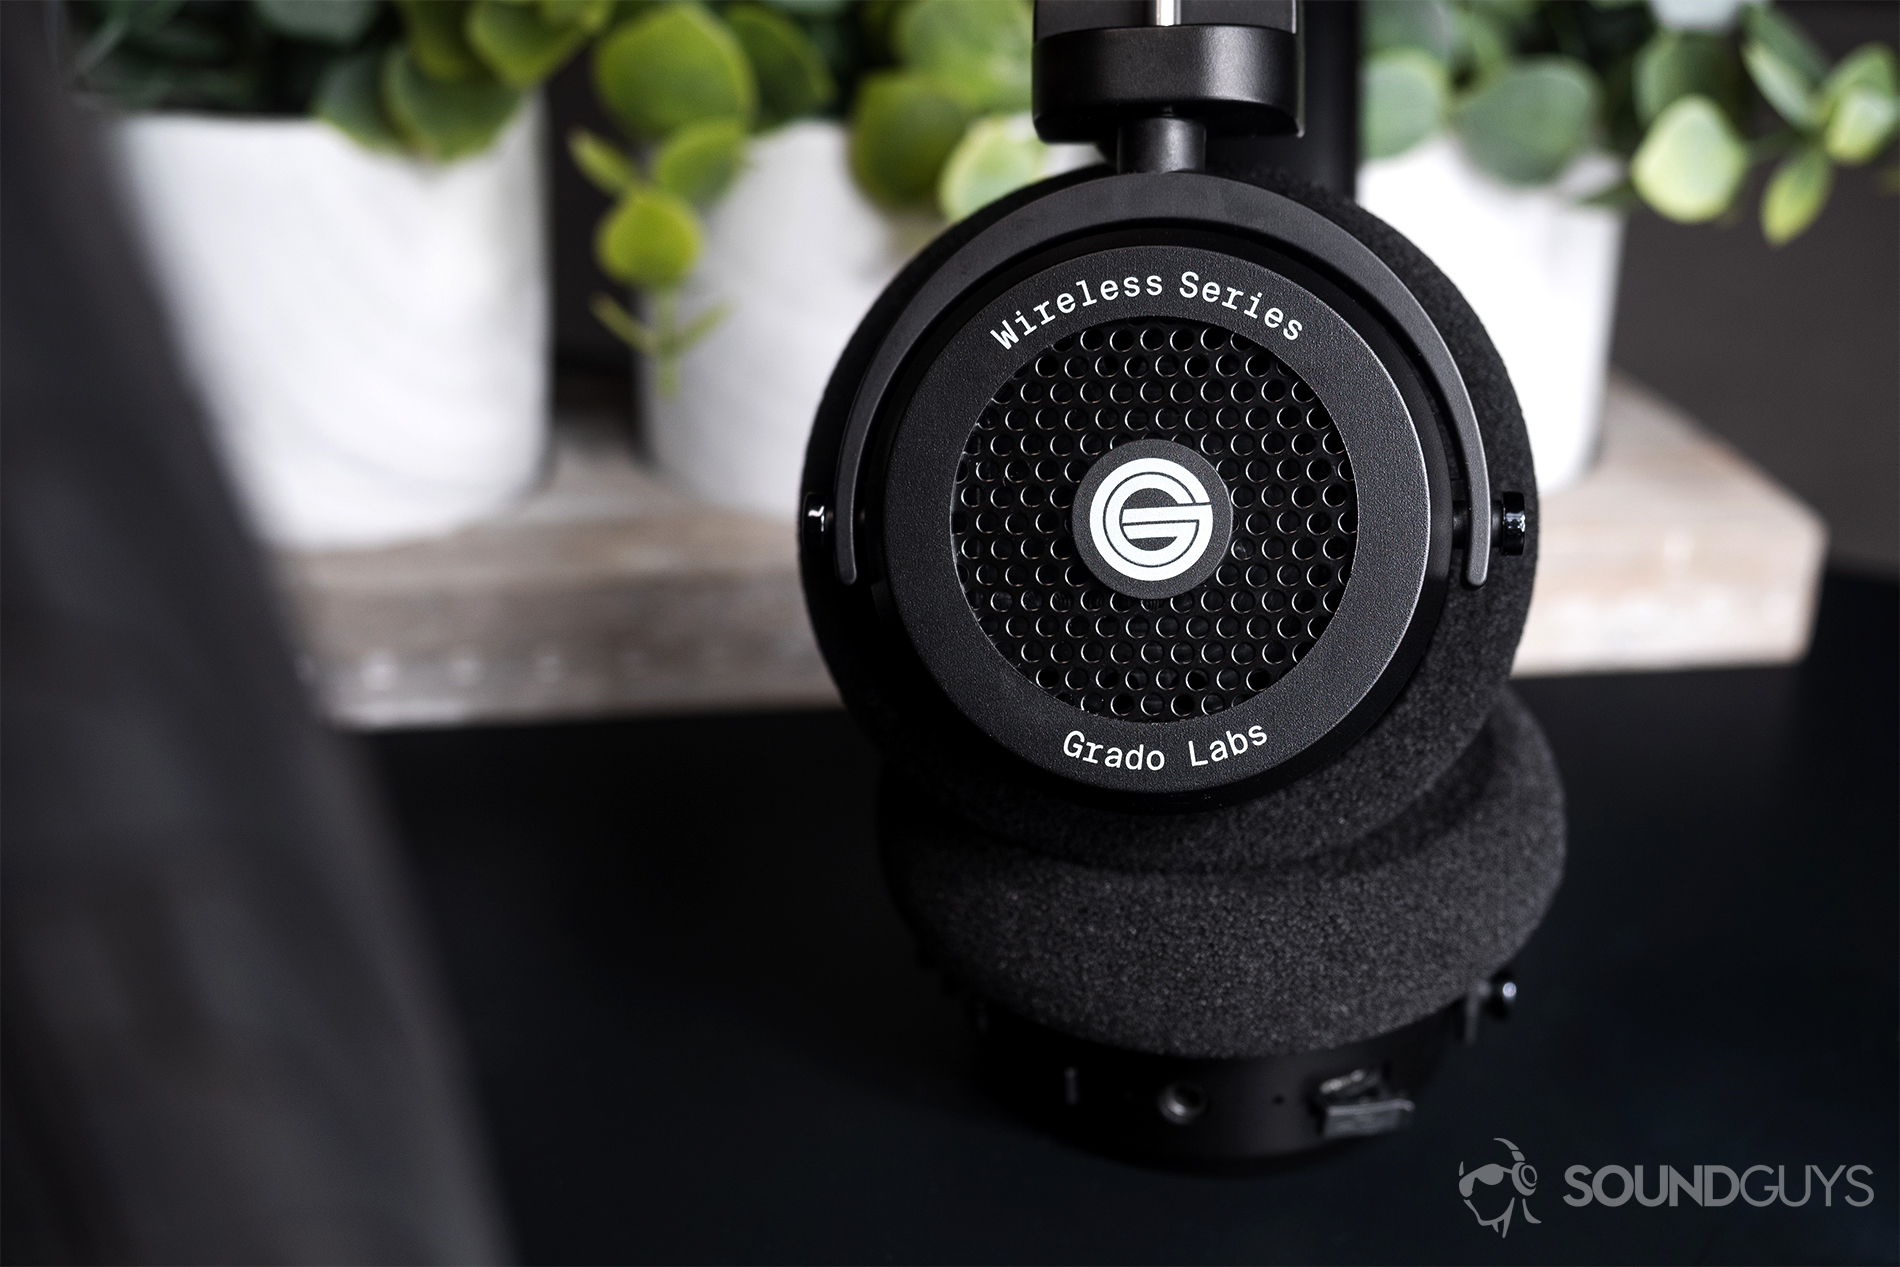 Grado GW100: The headphones standing up with one ear cup facing the camera in front of fake plants.